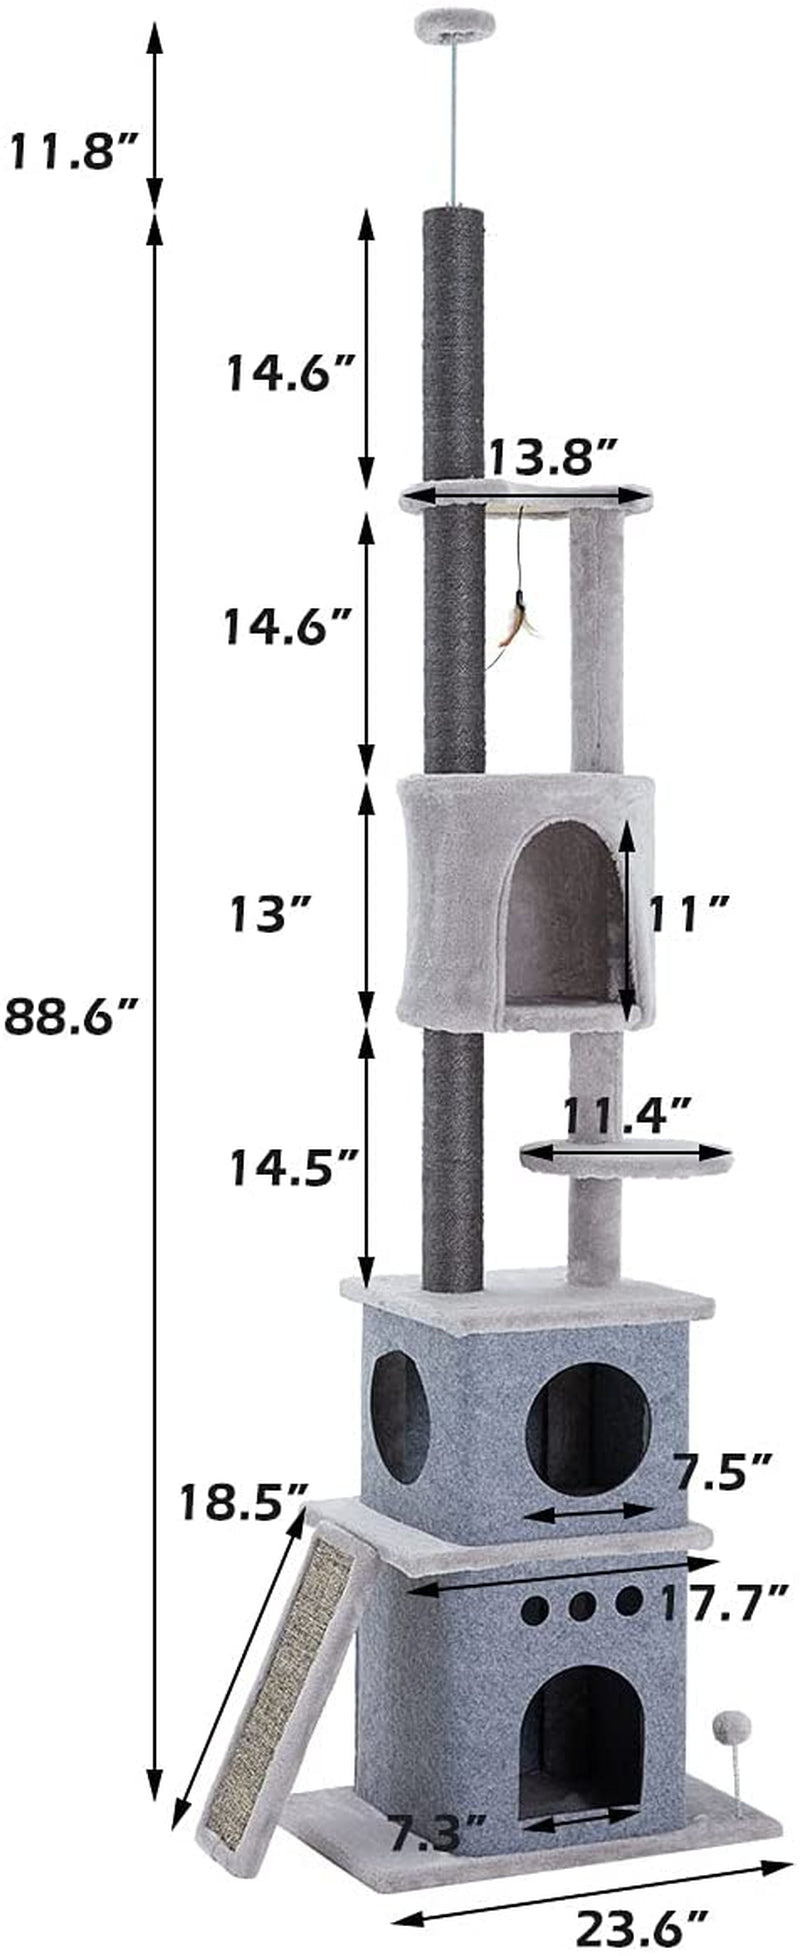 Erommy Multi-Level Cat Tree Cat Activity Towers Condo Furniture with Sisal-Covered Scratching Posts and Perches for Big Cats Pets House Play